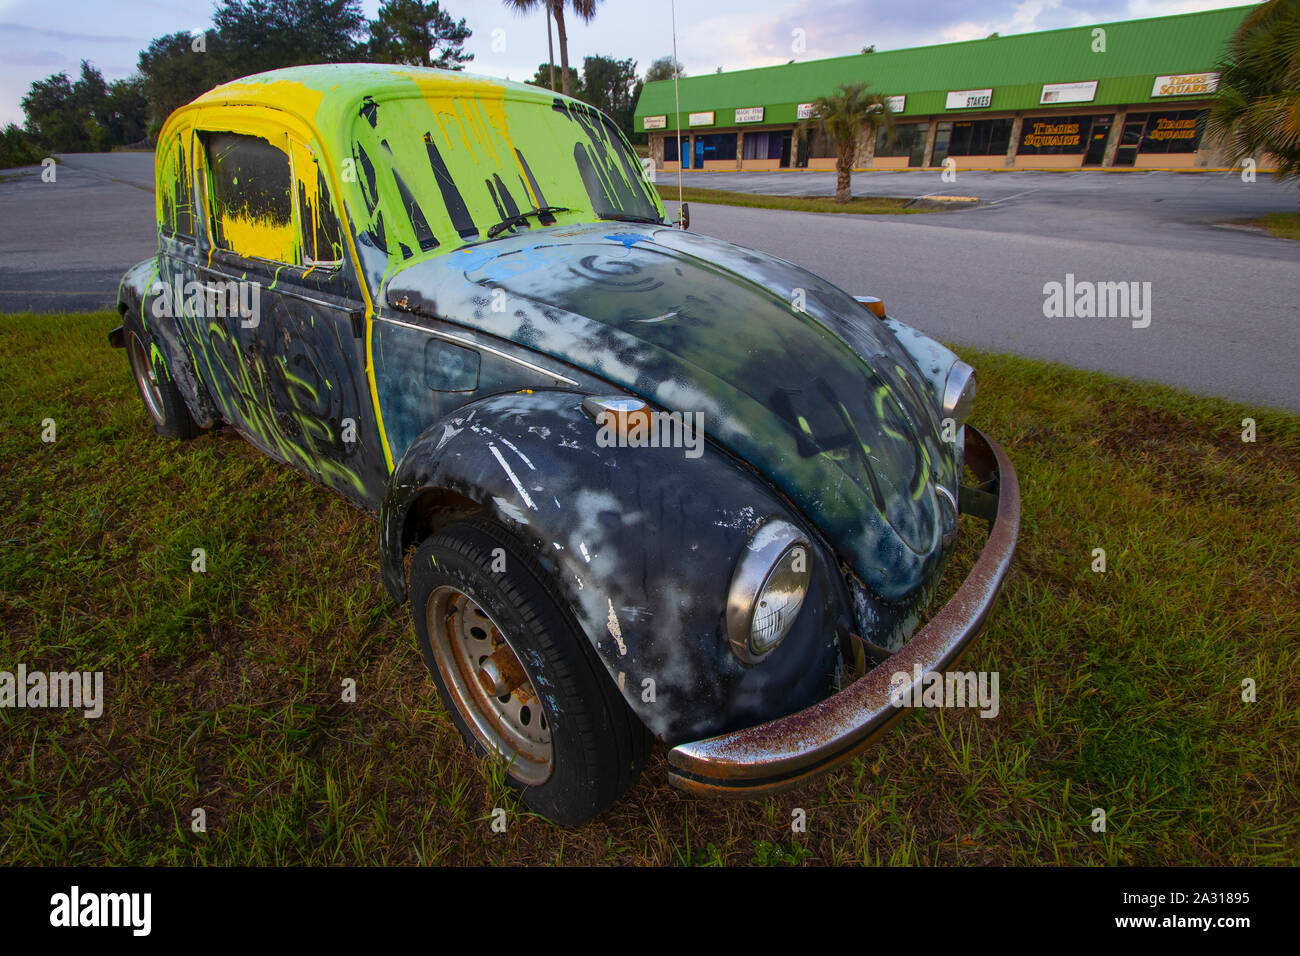 A painted hippie VW Stock Photo